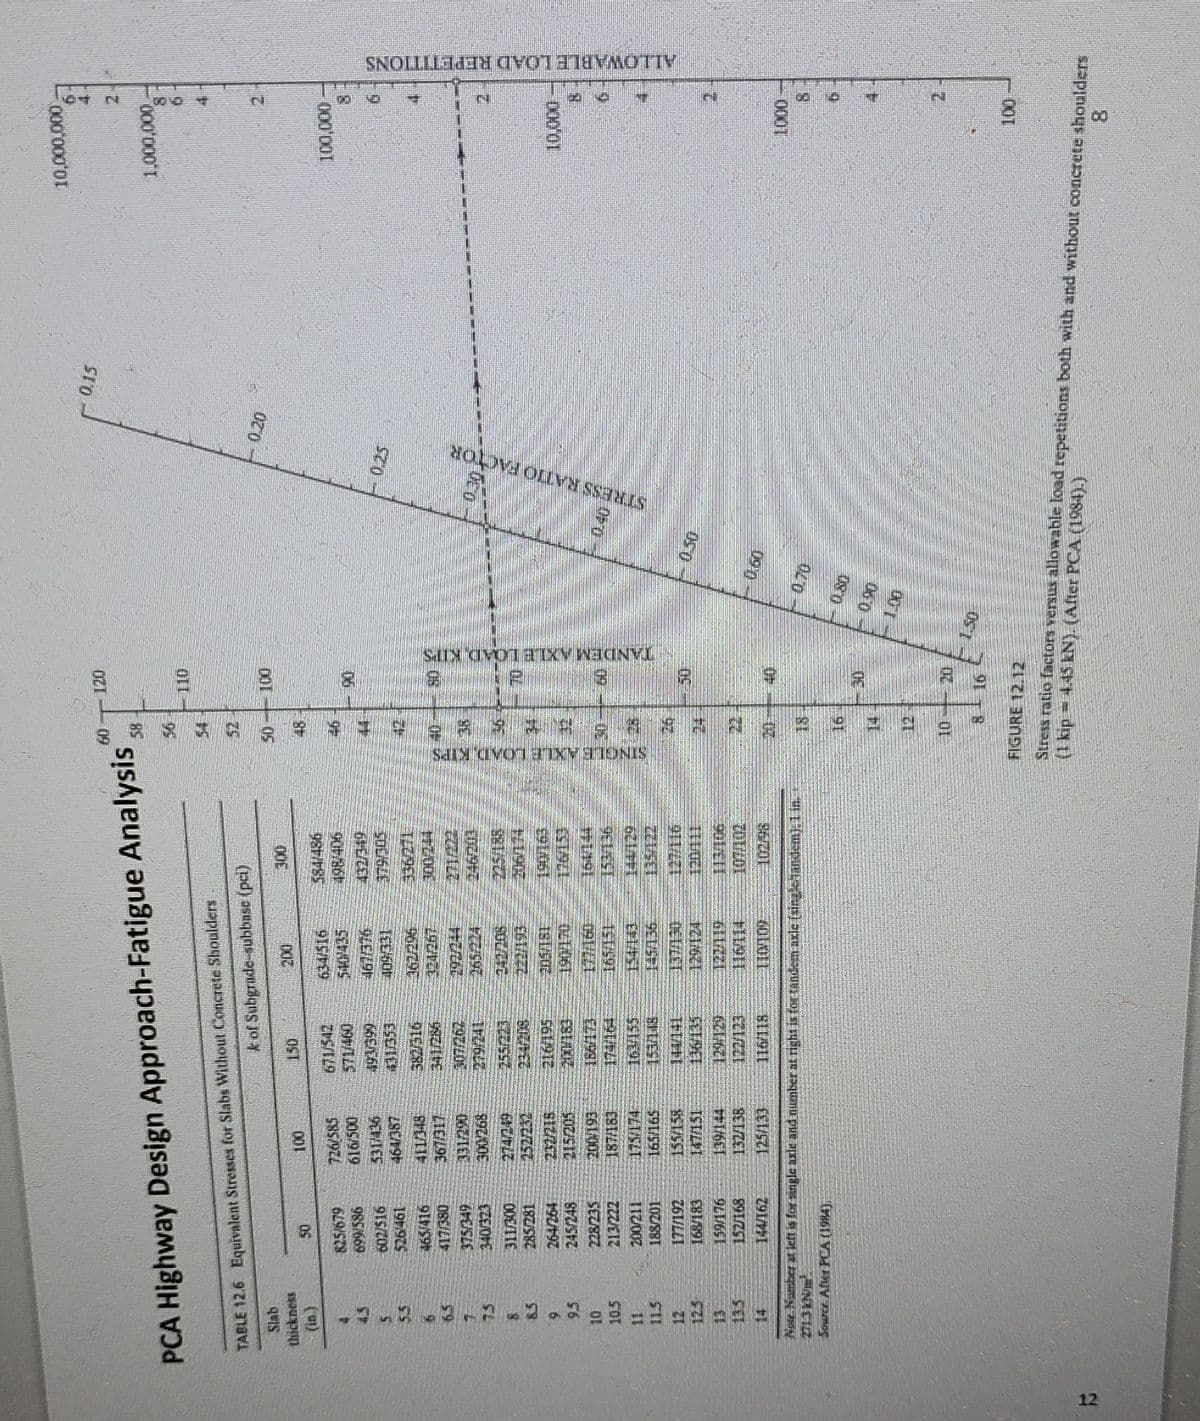 R
PCA Highway Design Approach-Fatigue Analysis
TABLE 12.6 Equivalent Stresses for Slabs Without Concrete Shoulders
k of Suhgrade-suhbnsc (pci)
Slab
thickness
75 -1.
5.5
8.5
9
9.5
10
10.5
50
825/679
985/669
602/516
526461
465/416
417/380
375/349
340/323
311/300
285/281
264/264
245/248
228/235
213/222
200/211
188/201
168/183
159/176
100
726/585
616/500
531 436
464/387
411348
367/317
331220
300/2.68
274/249
252/232
215/205
200/193
187-183
165/165
155/158
147/151
150
671/542
571/460
1911399
131653
382/316
300/202
216195
2018
13655
200
634/516
5407435
92E/191
109331
186502
300
379505
139144
132/136
17123
125/133
116-118
Note. Number at left is for single axle and number at right is for tandemn axle (singlexandem). 1 in.
Source. After PCA (1984).
107002
SINGLE AXLE LOAD, KIPS
60
F
48
51
2
S
A
20
12
In
7
15
Sm
120
3
S
TANDEM AXLE LOAD KITS
STRESS RATIO FACTOR
0.20
0.15
10,000,000
NAO
1,000,000
4
100,000
60
2
11
10,000
1947
N
1000
26
12
N
100
ALLOWABLE LOAD REPETITIONS
FIGURE 12.12
(1 kip = 4.45 KN). (After PCA (1984).)
Stress ratio factors versus allowable load repetitions both with and without concrete shoulders
8